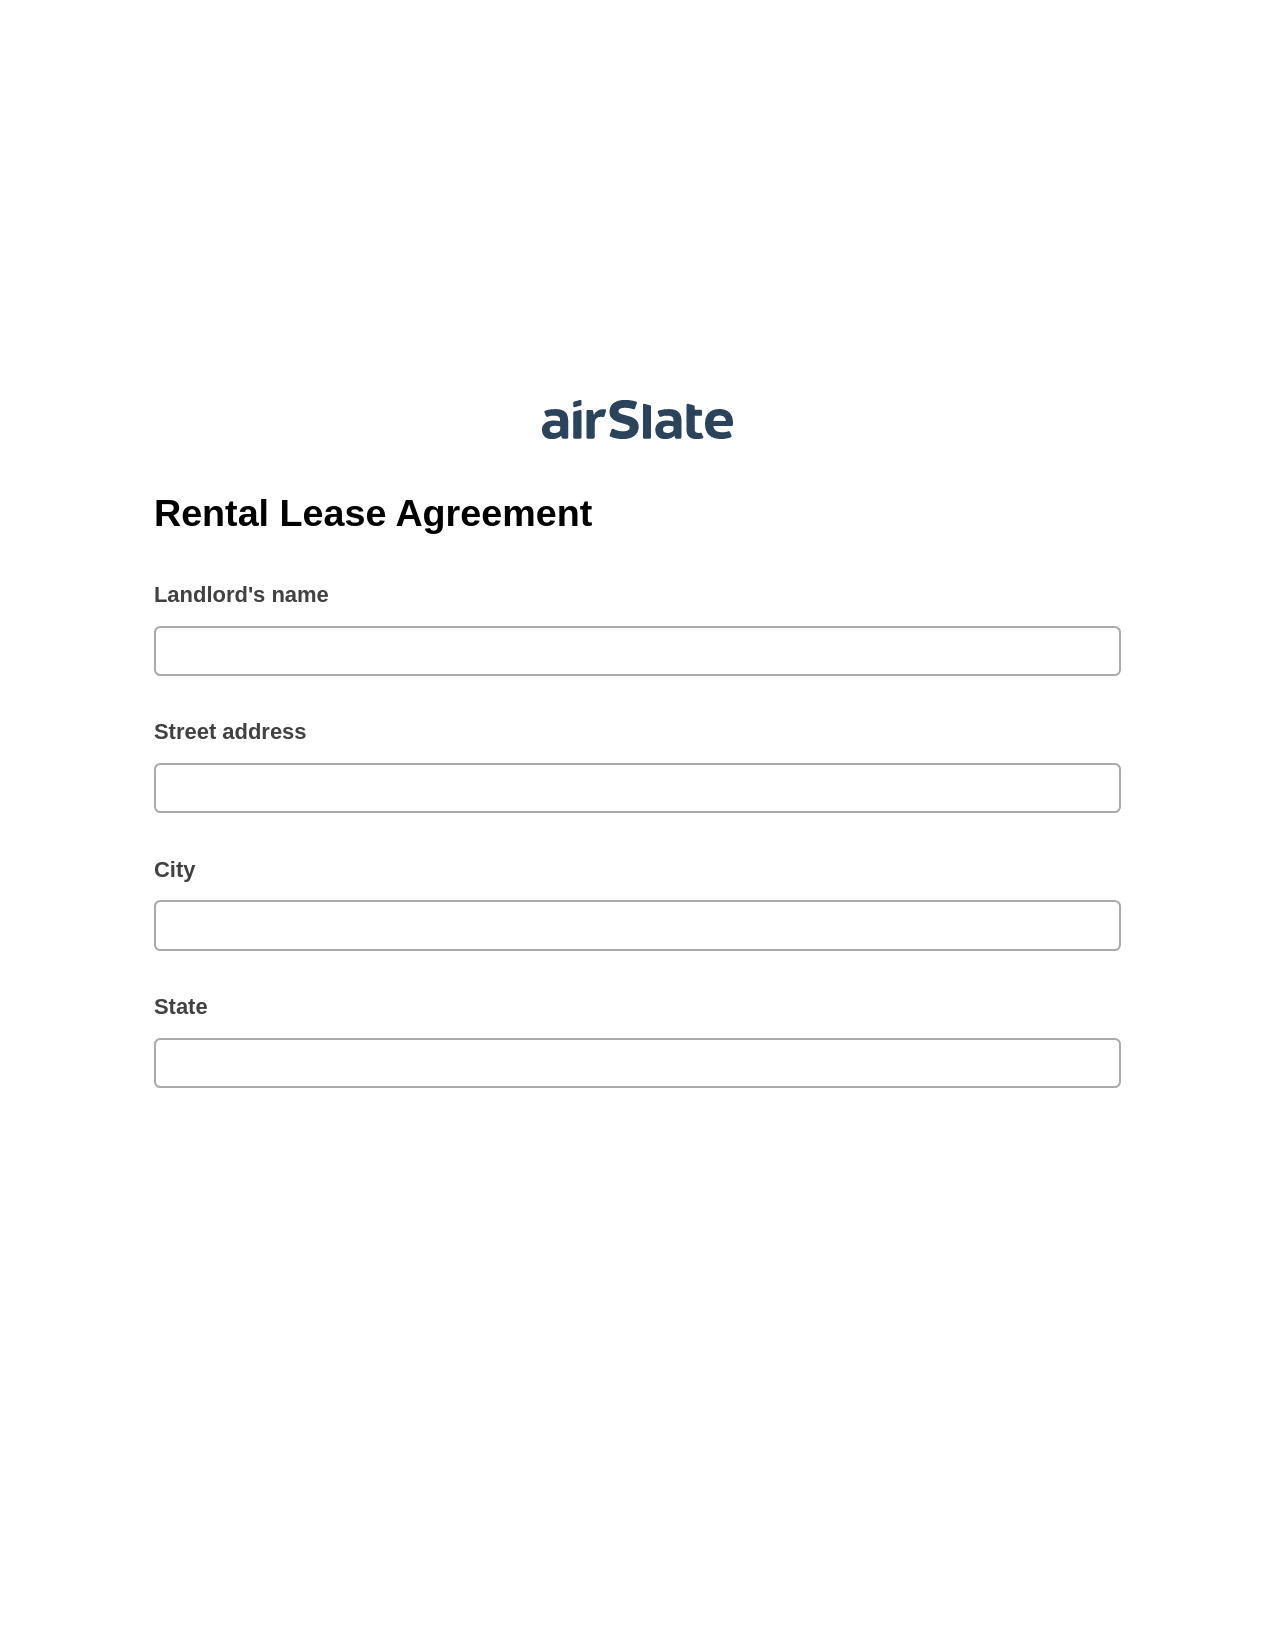 Rental Lease Agreement Pre-fill Document Bot, Jira Bot, Export to Excel 365 Bot